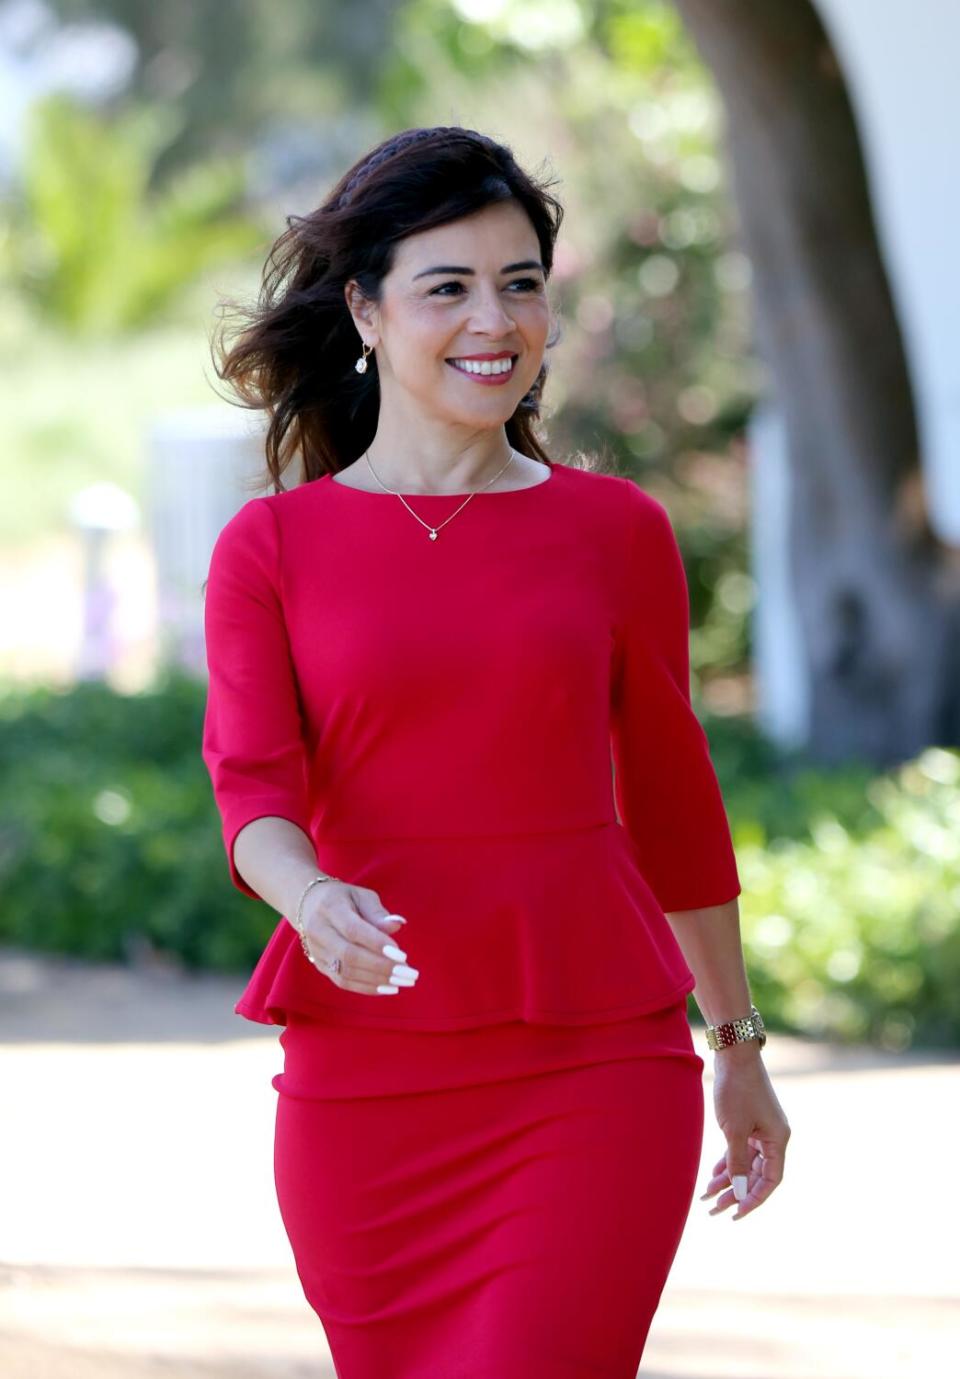 A smiling woman in a red suit walks toward the camera outdoors.